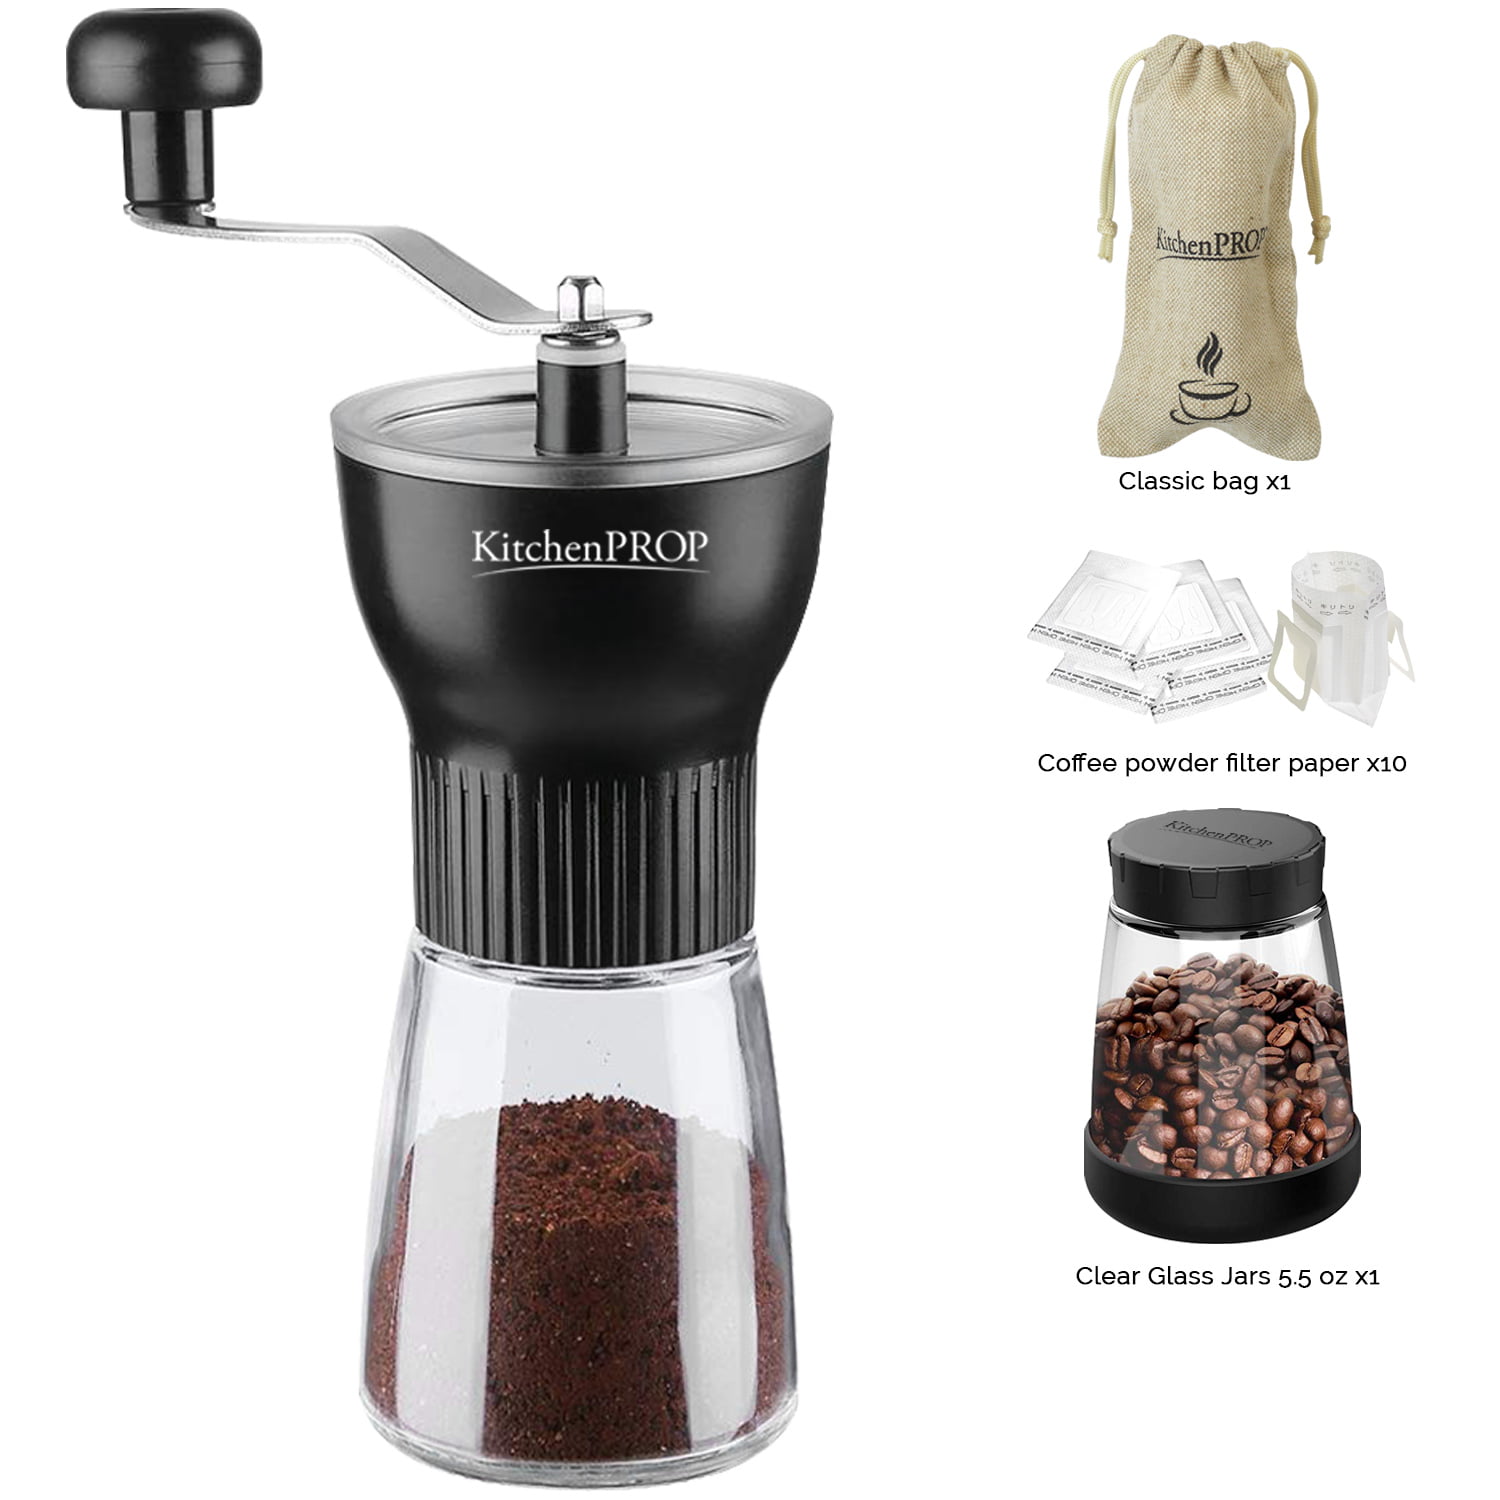 New Coffee Grinder Manual Conical Ceramic Burr Mill Herb Spice Grind Hand Tool